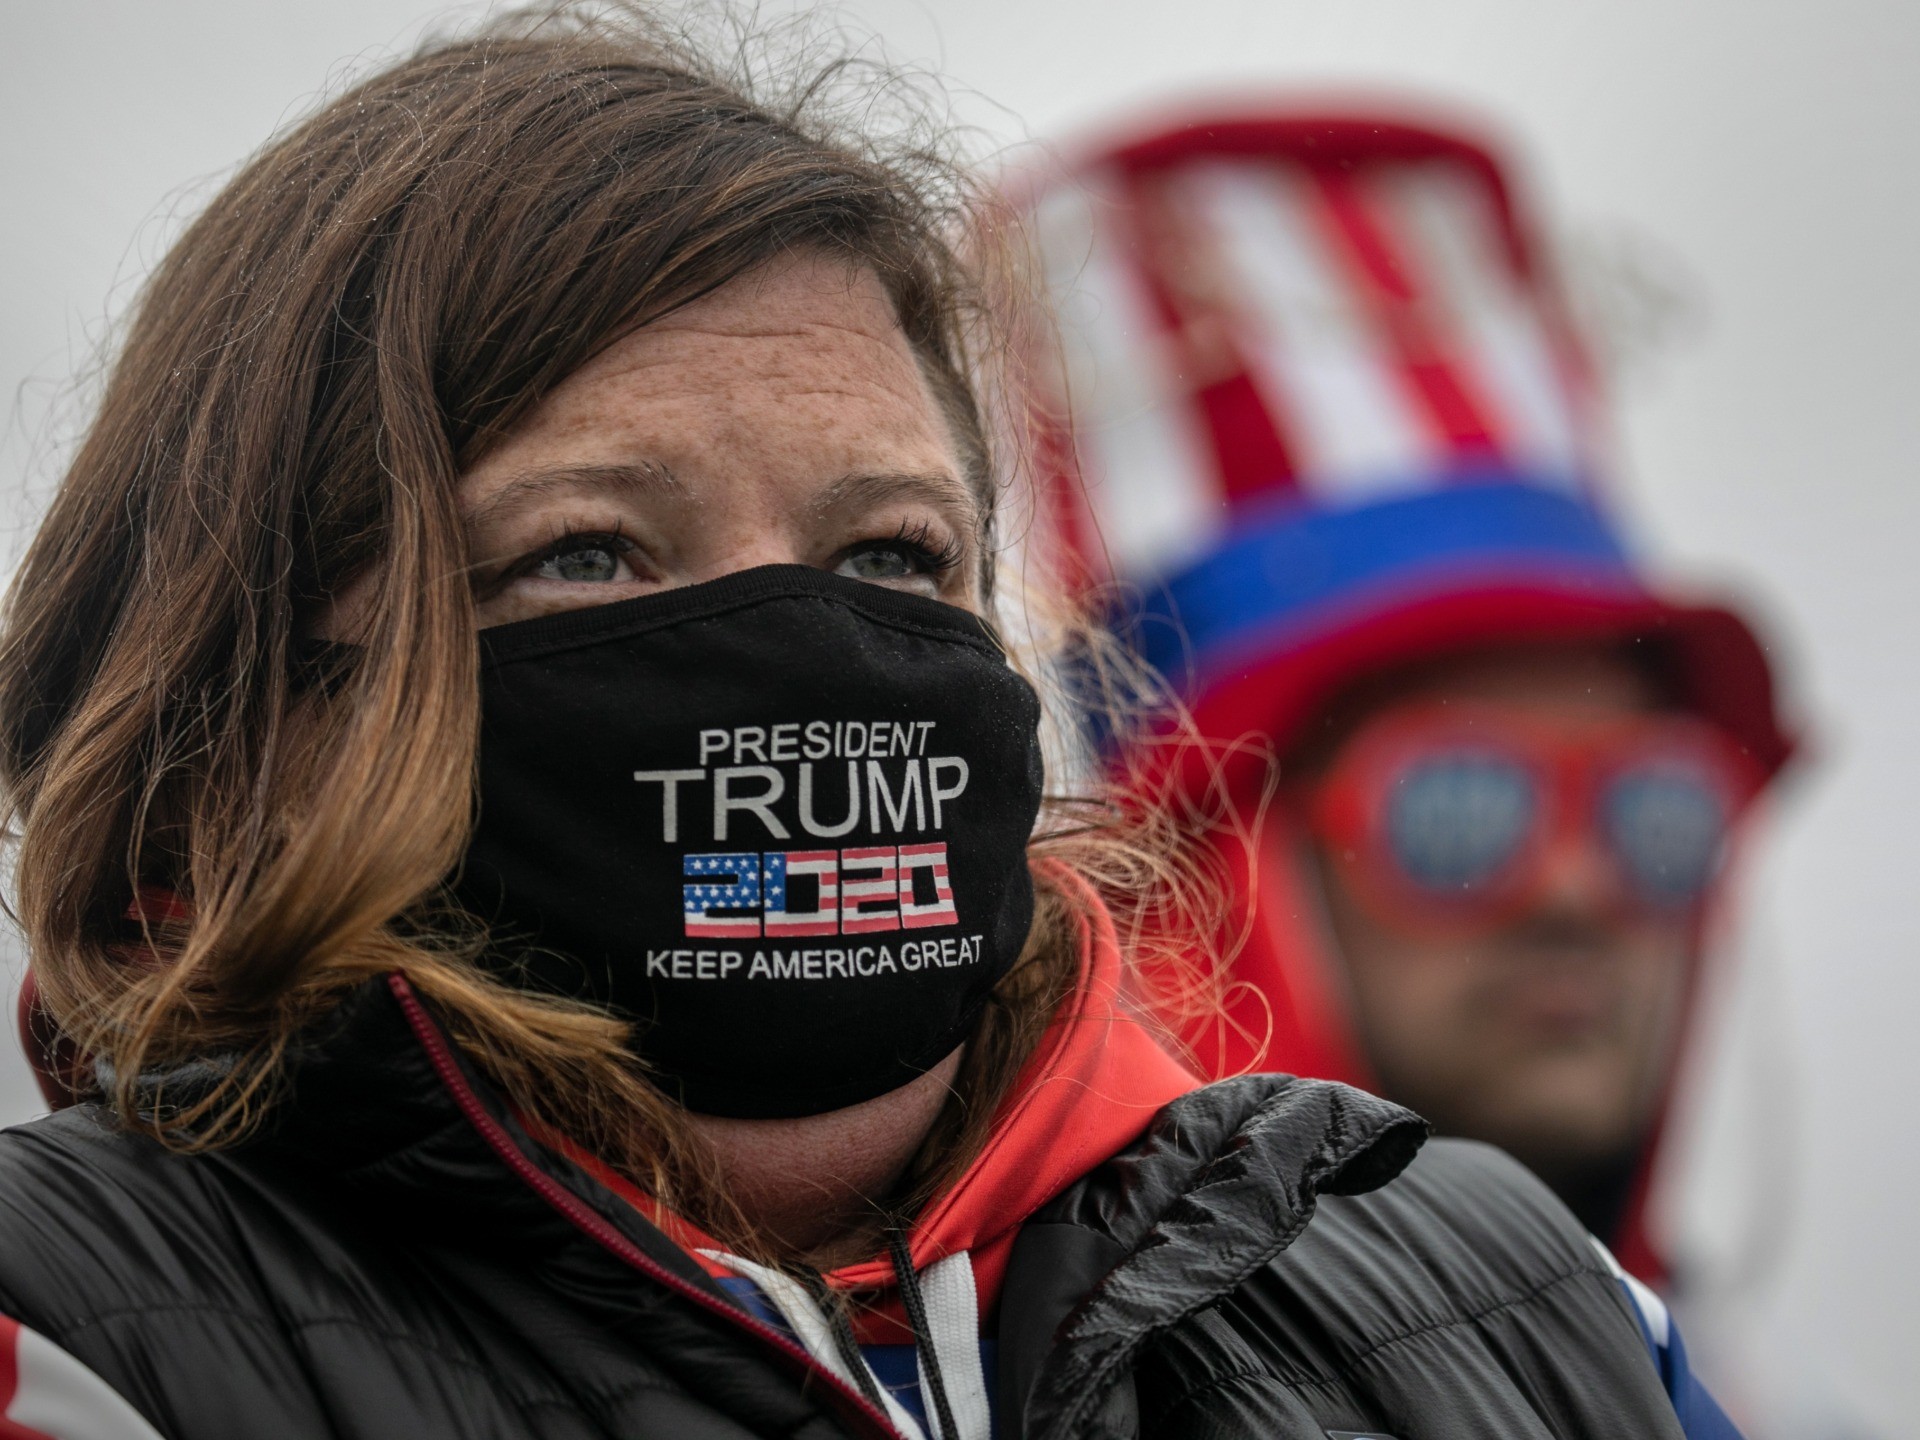 Watch: Trump Supporters Wait Hours in Dark, Freezing Temps for Michigan Rally